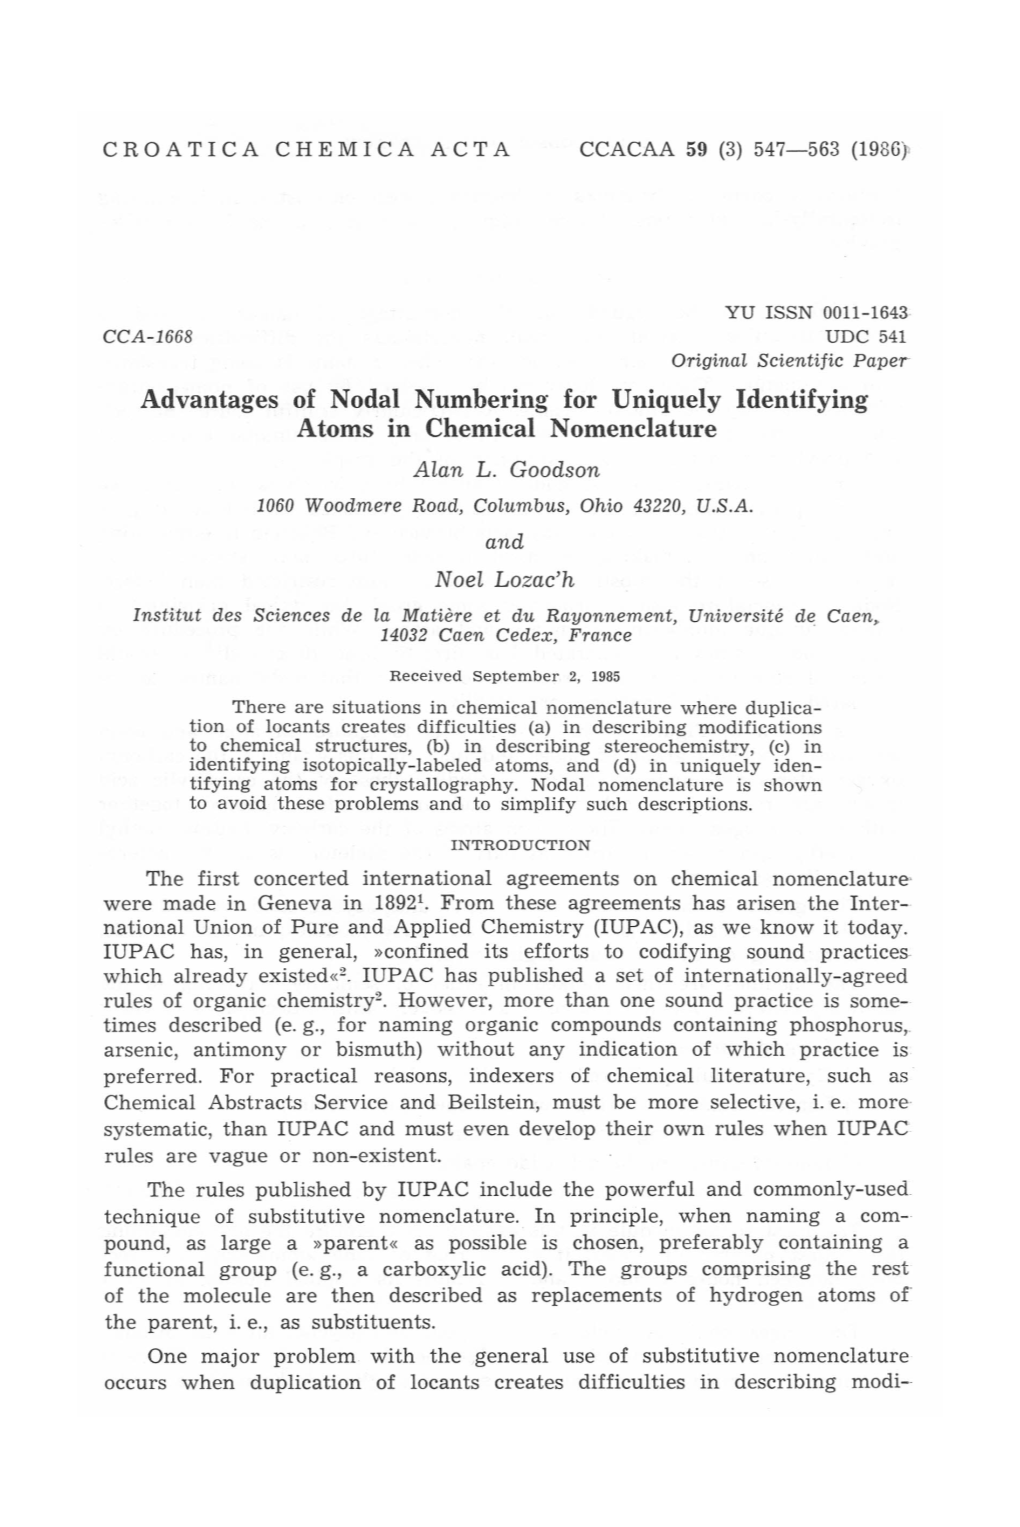 Advantages of Nodal Numbering for Uniquely Identifying Atoms in Chemical Nomenclature Alan L